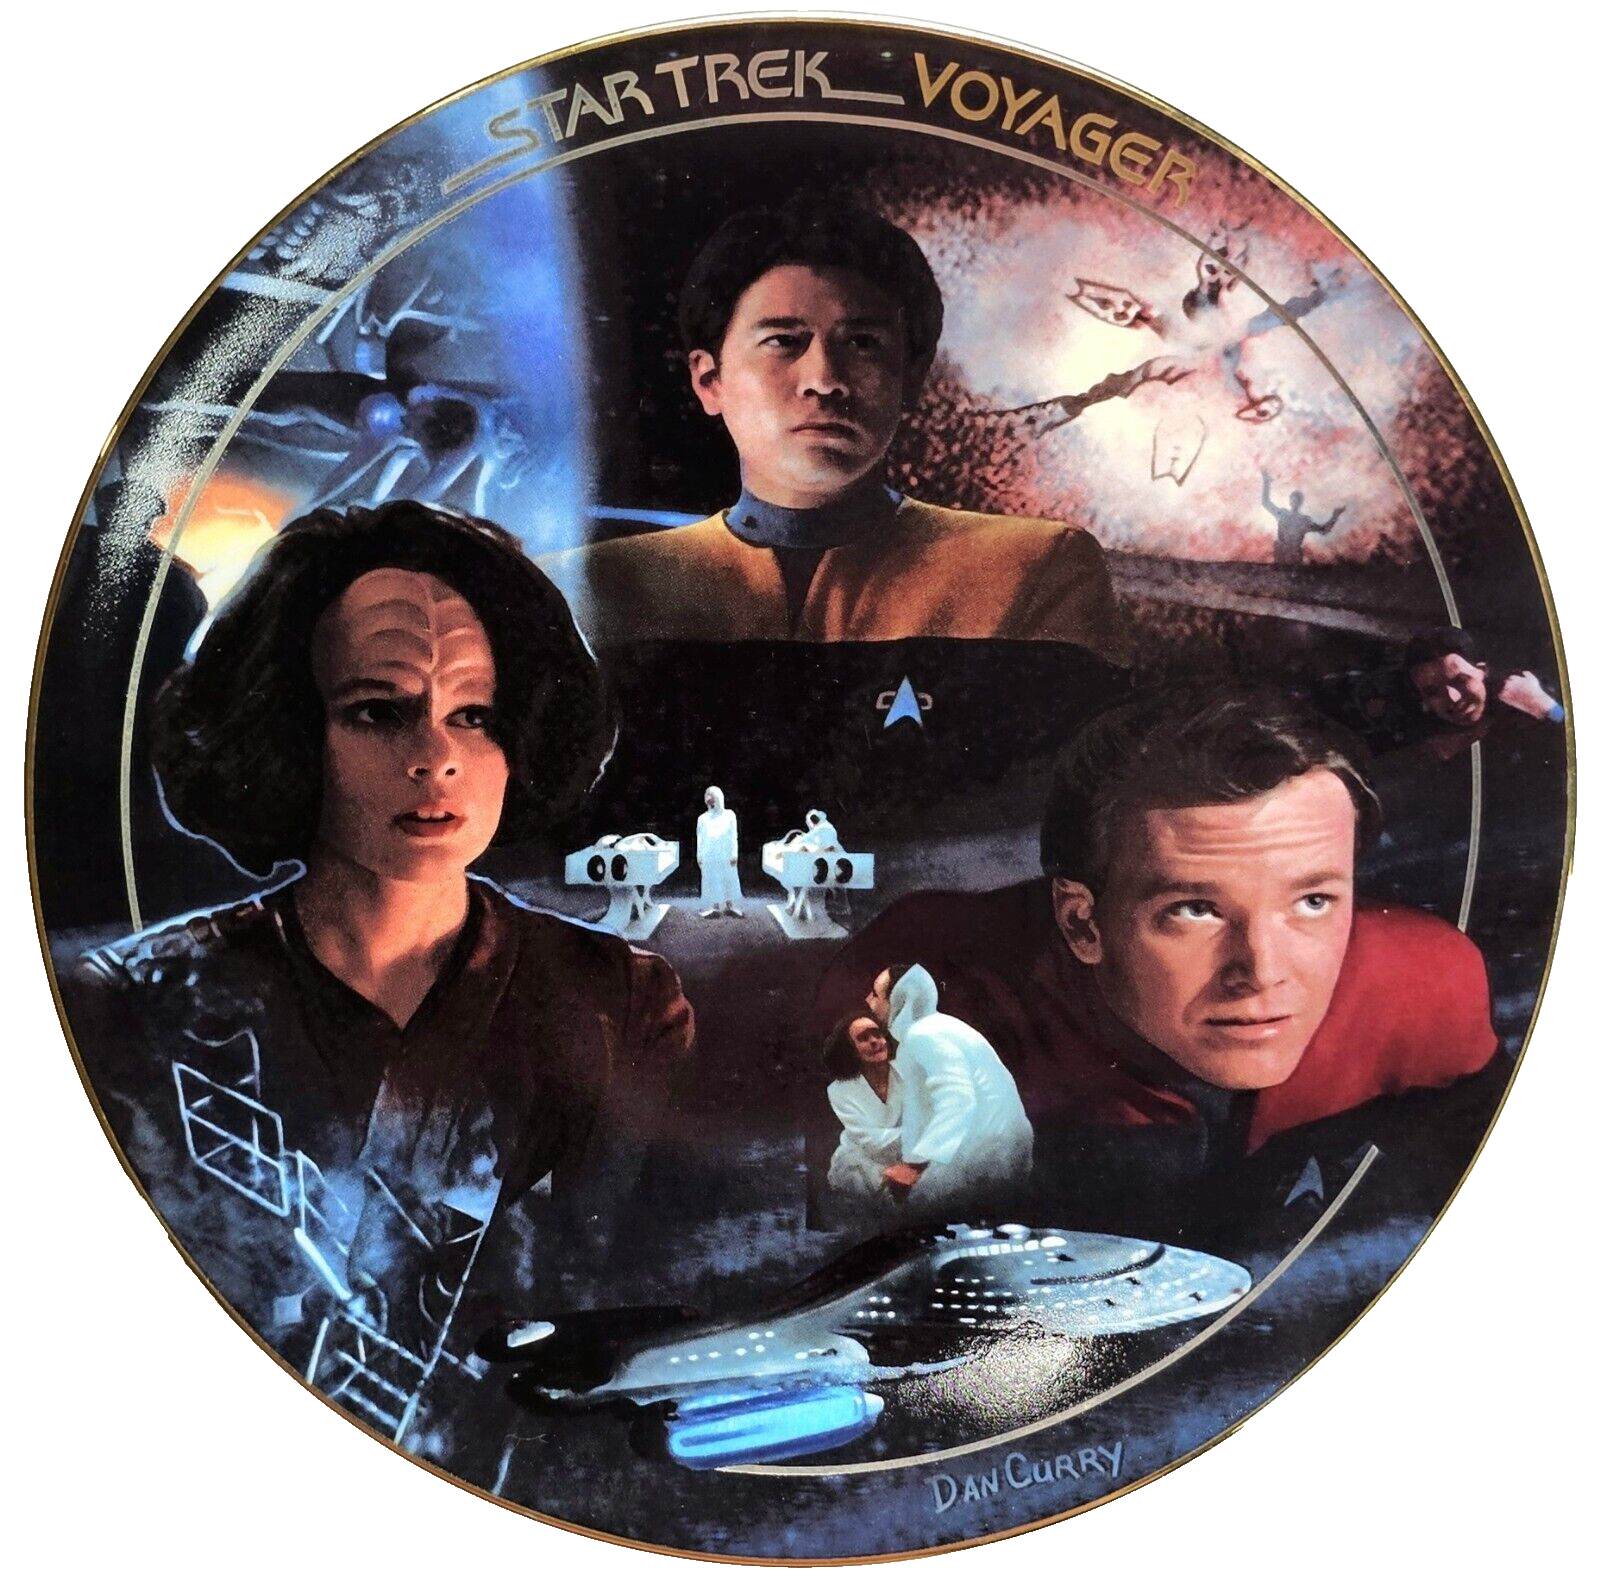 Primary image for Bonds of Friendship Star Trek Voyager Episodes Hamilton Plate by Dan Curry 1996